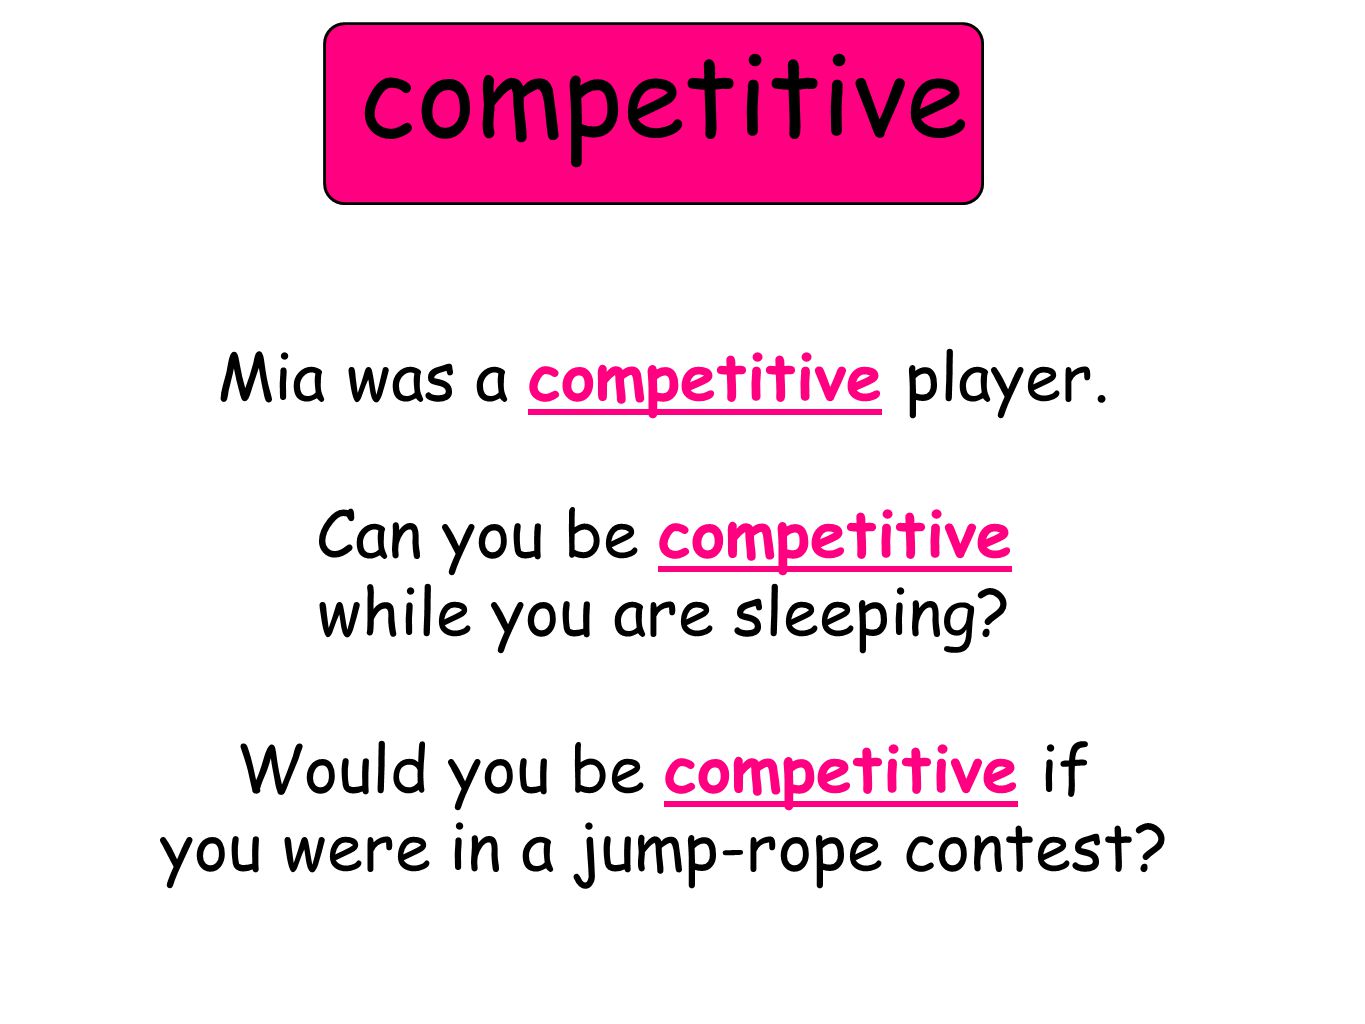 competitive Mia was a competitive player. Can you be competitive while you are sleeping.